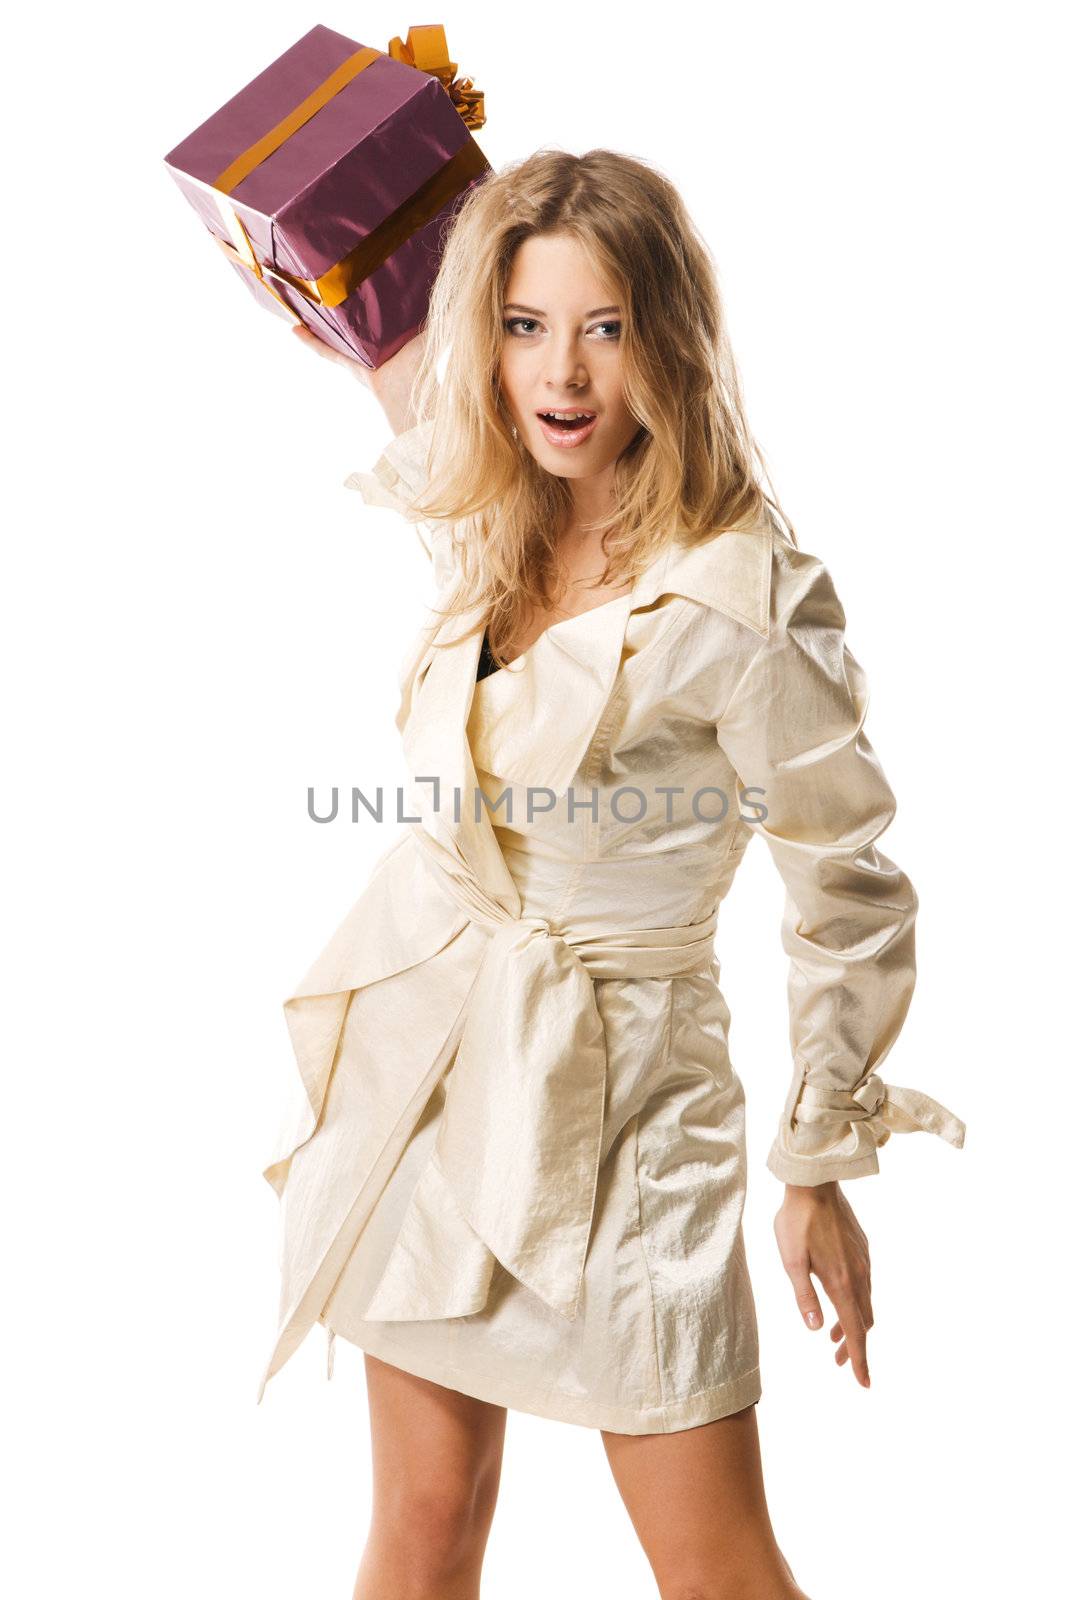 Furious woman throwing a gift box, white background